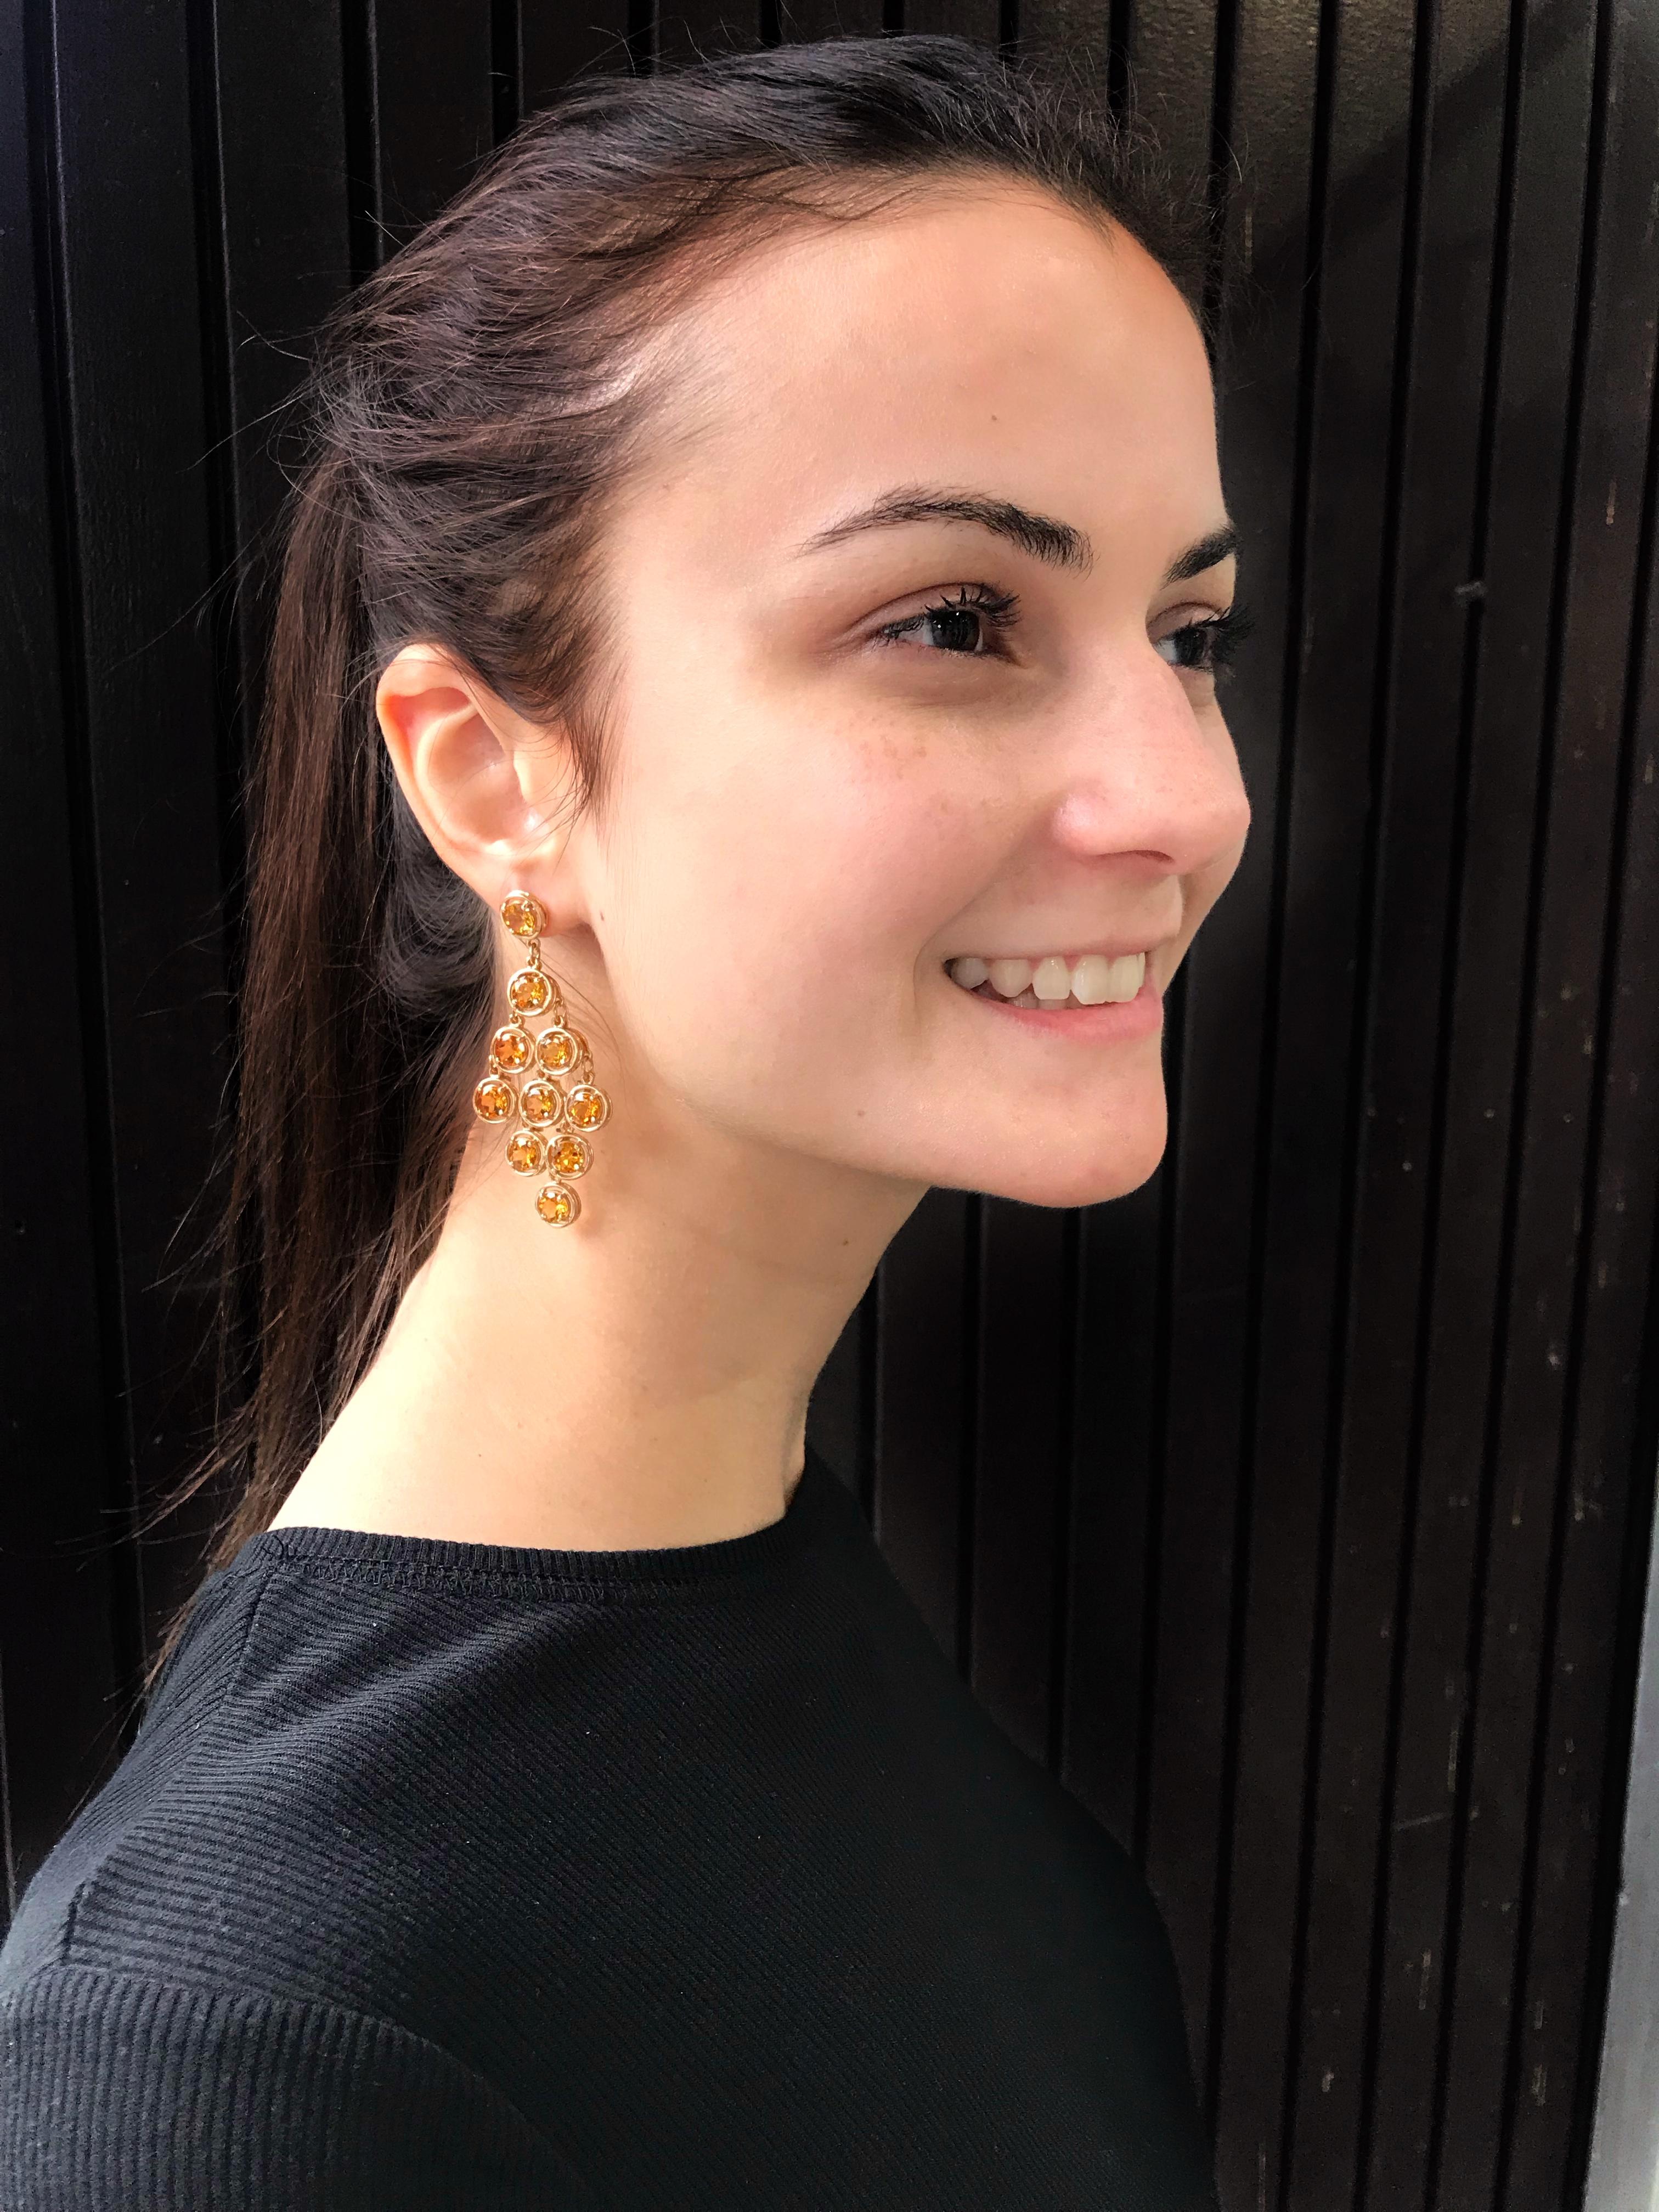 Sensational Chandelier Earrings set with twenty round faceted Citrine stones mounted in 14k yellow gold hand crafted 4-claw setting with post and butterfly closure; measuring approx. 2.5” long. A perfect complement to every wardrobe… Illuminating